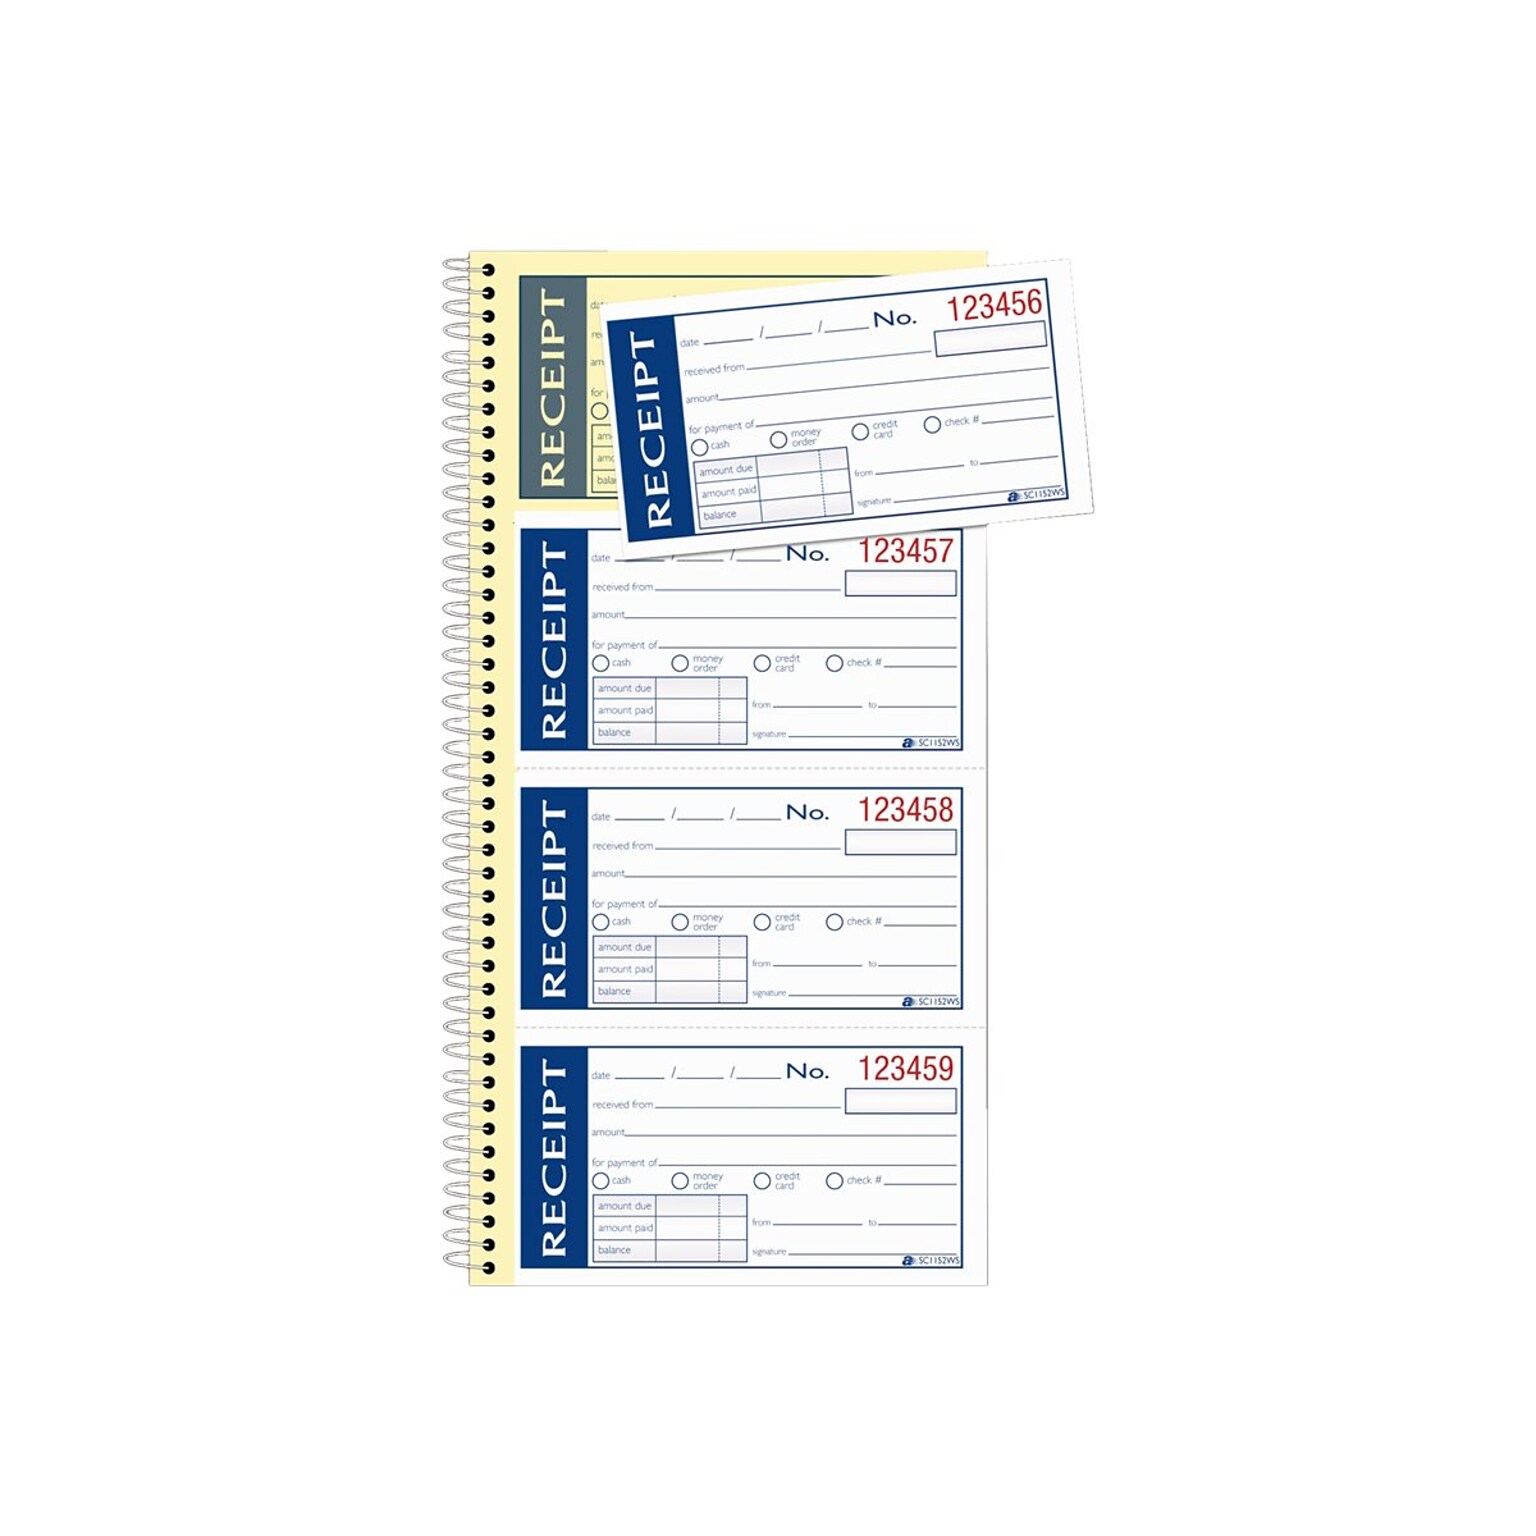 Adams Write N Stick 2-Part Carbonless Receipts Book, 2.75 x 4.75, White, 200 Forms/Book (SC1152WS)